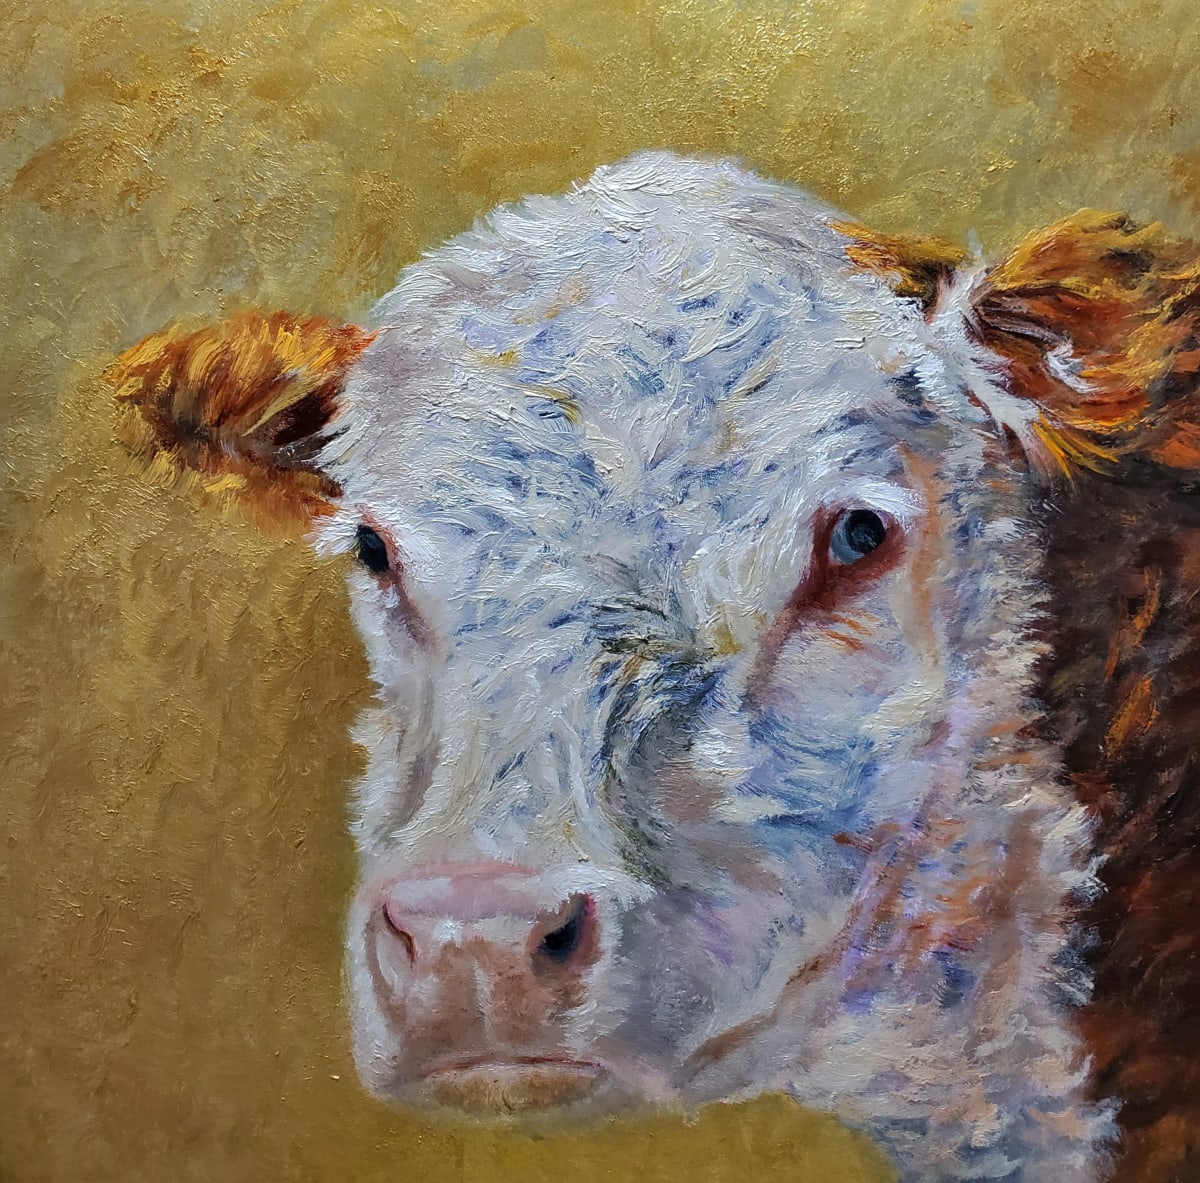 Sweet Rosie by Linda Briesacher  Image: On Sale and Available through Mena Art Gallery (479) 394-3880